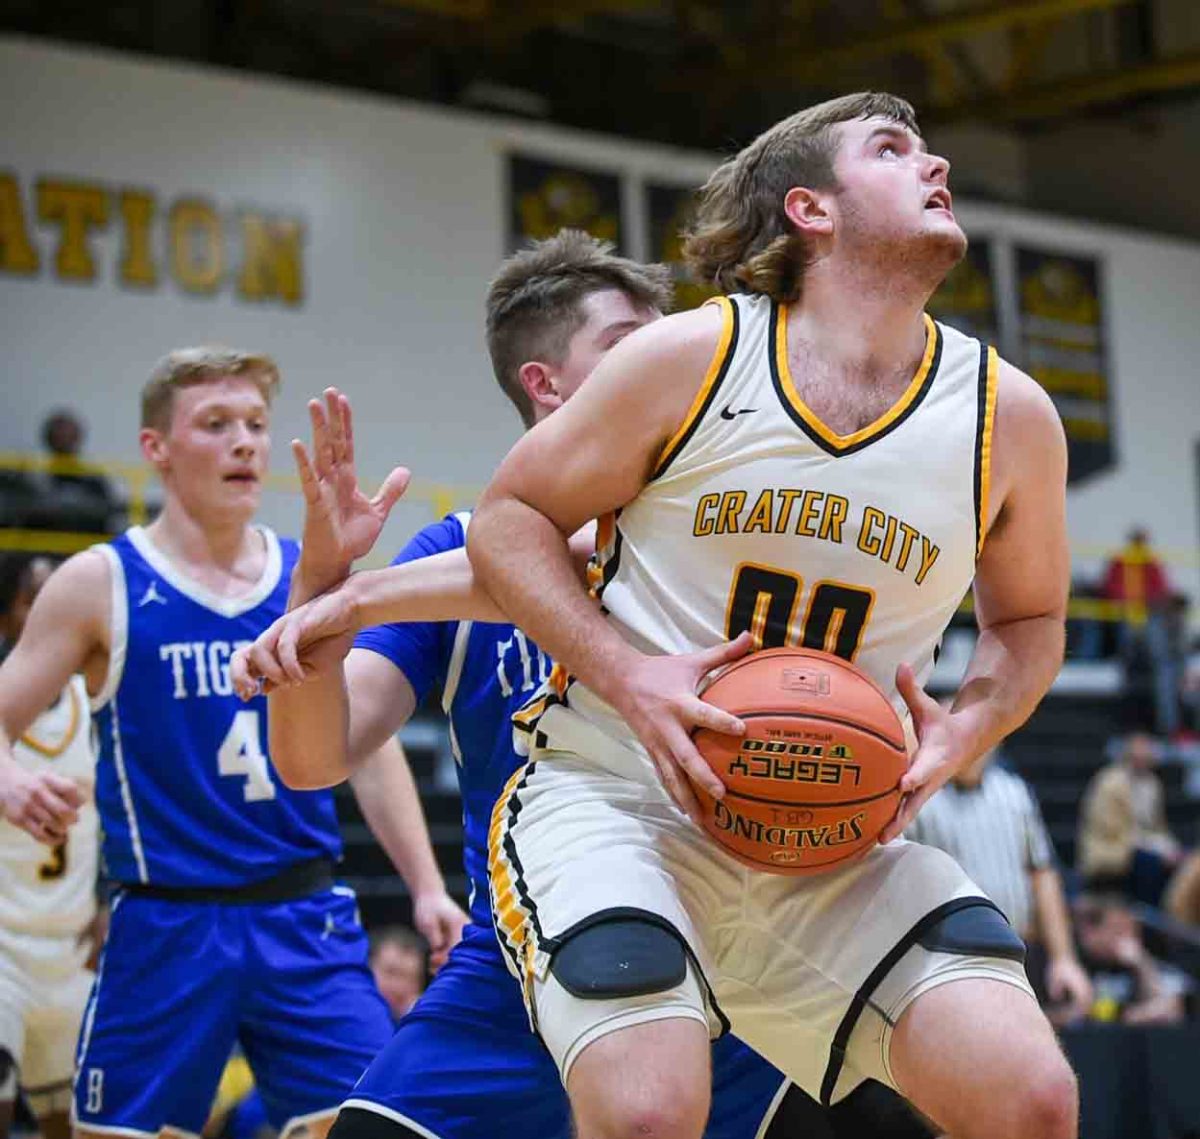 Middlesboro+senior+center+Bryce+Bowling+worked+inside+for+two+of+his+11+points+on+Thursday+in+the+Jackets+66-58+win+over+visiting+Barbourville.